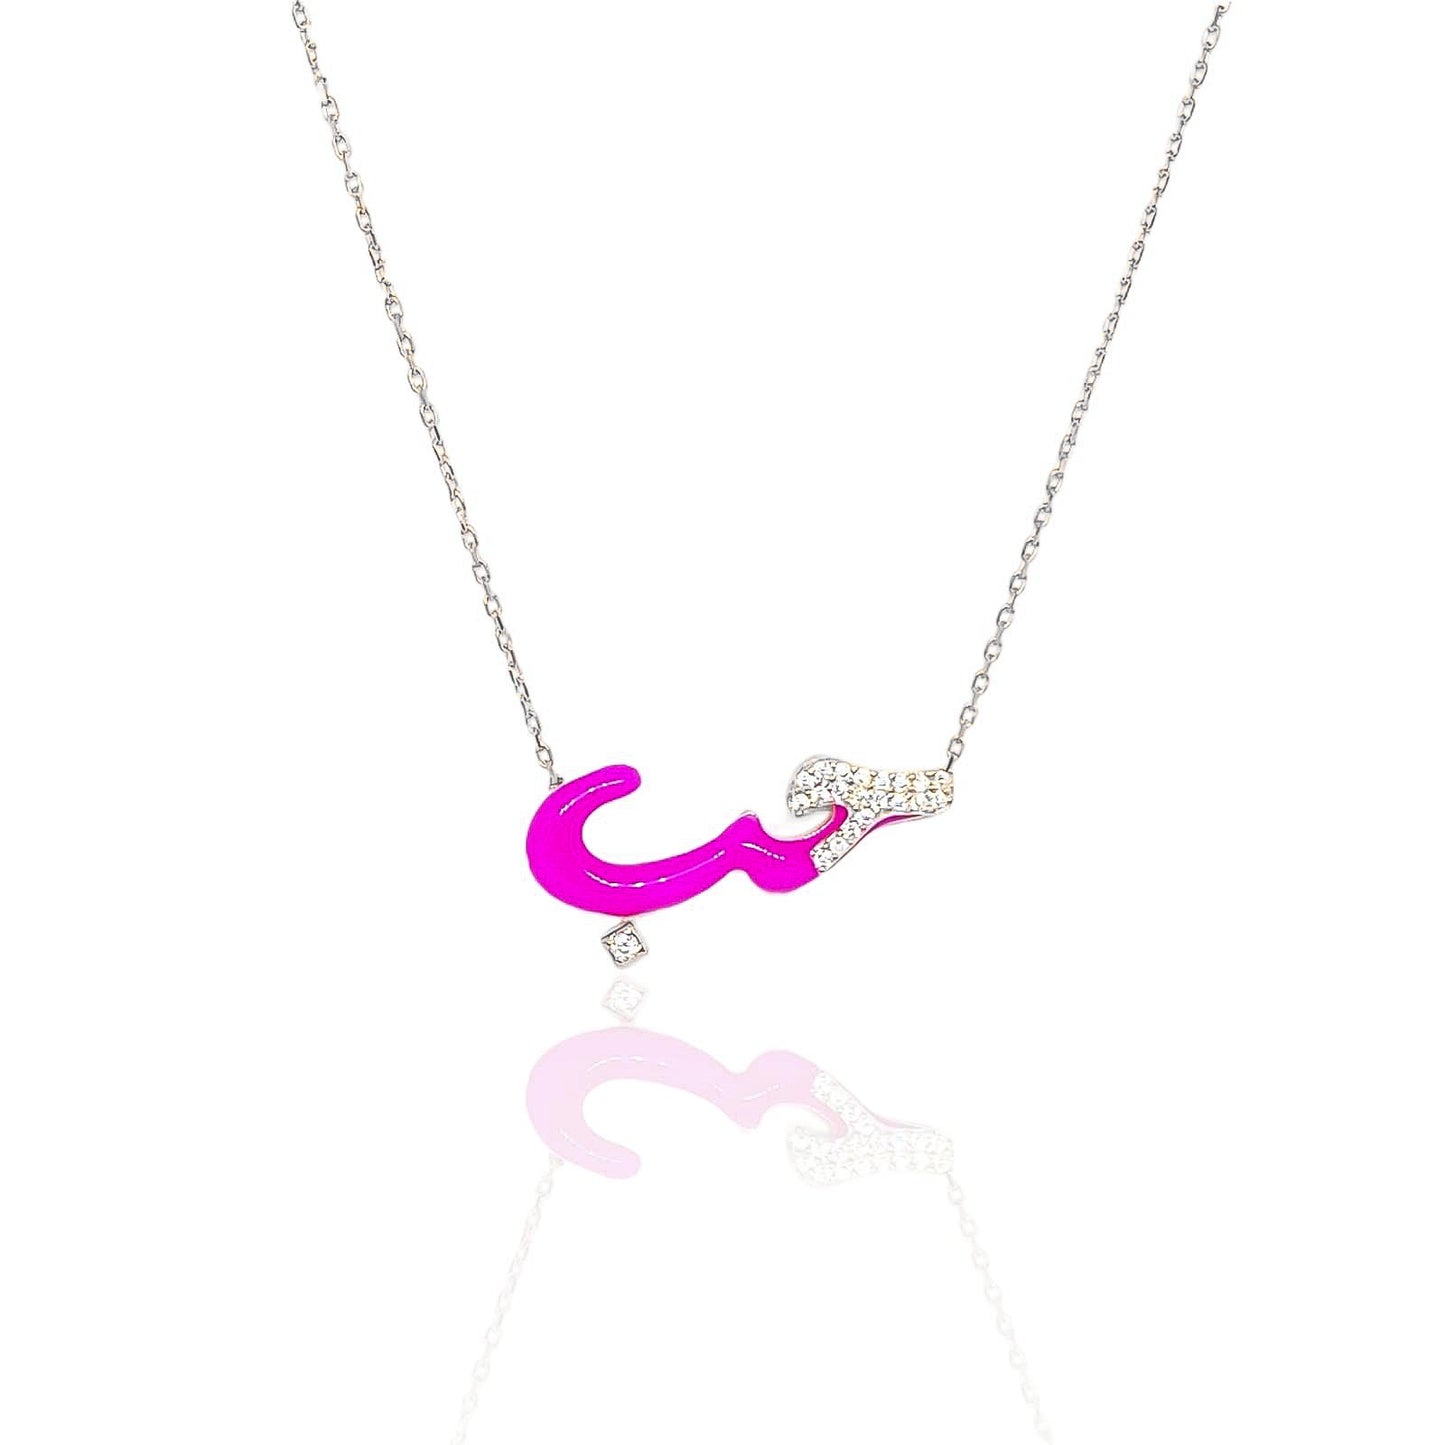 Fuchsia Enameled with Stones in Arabic Necklace